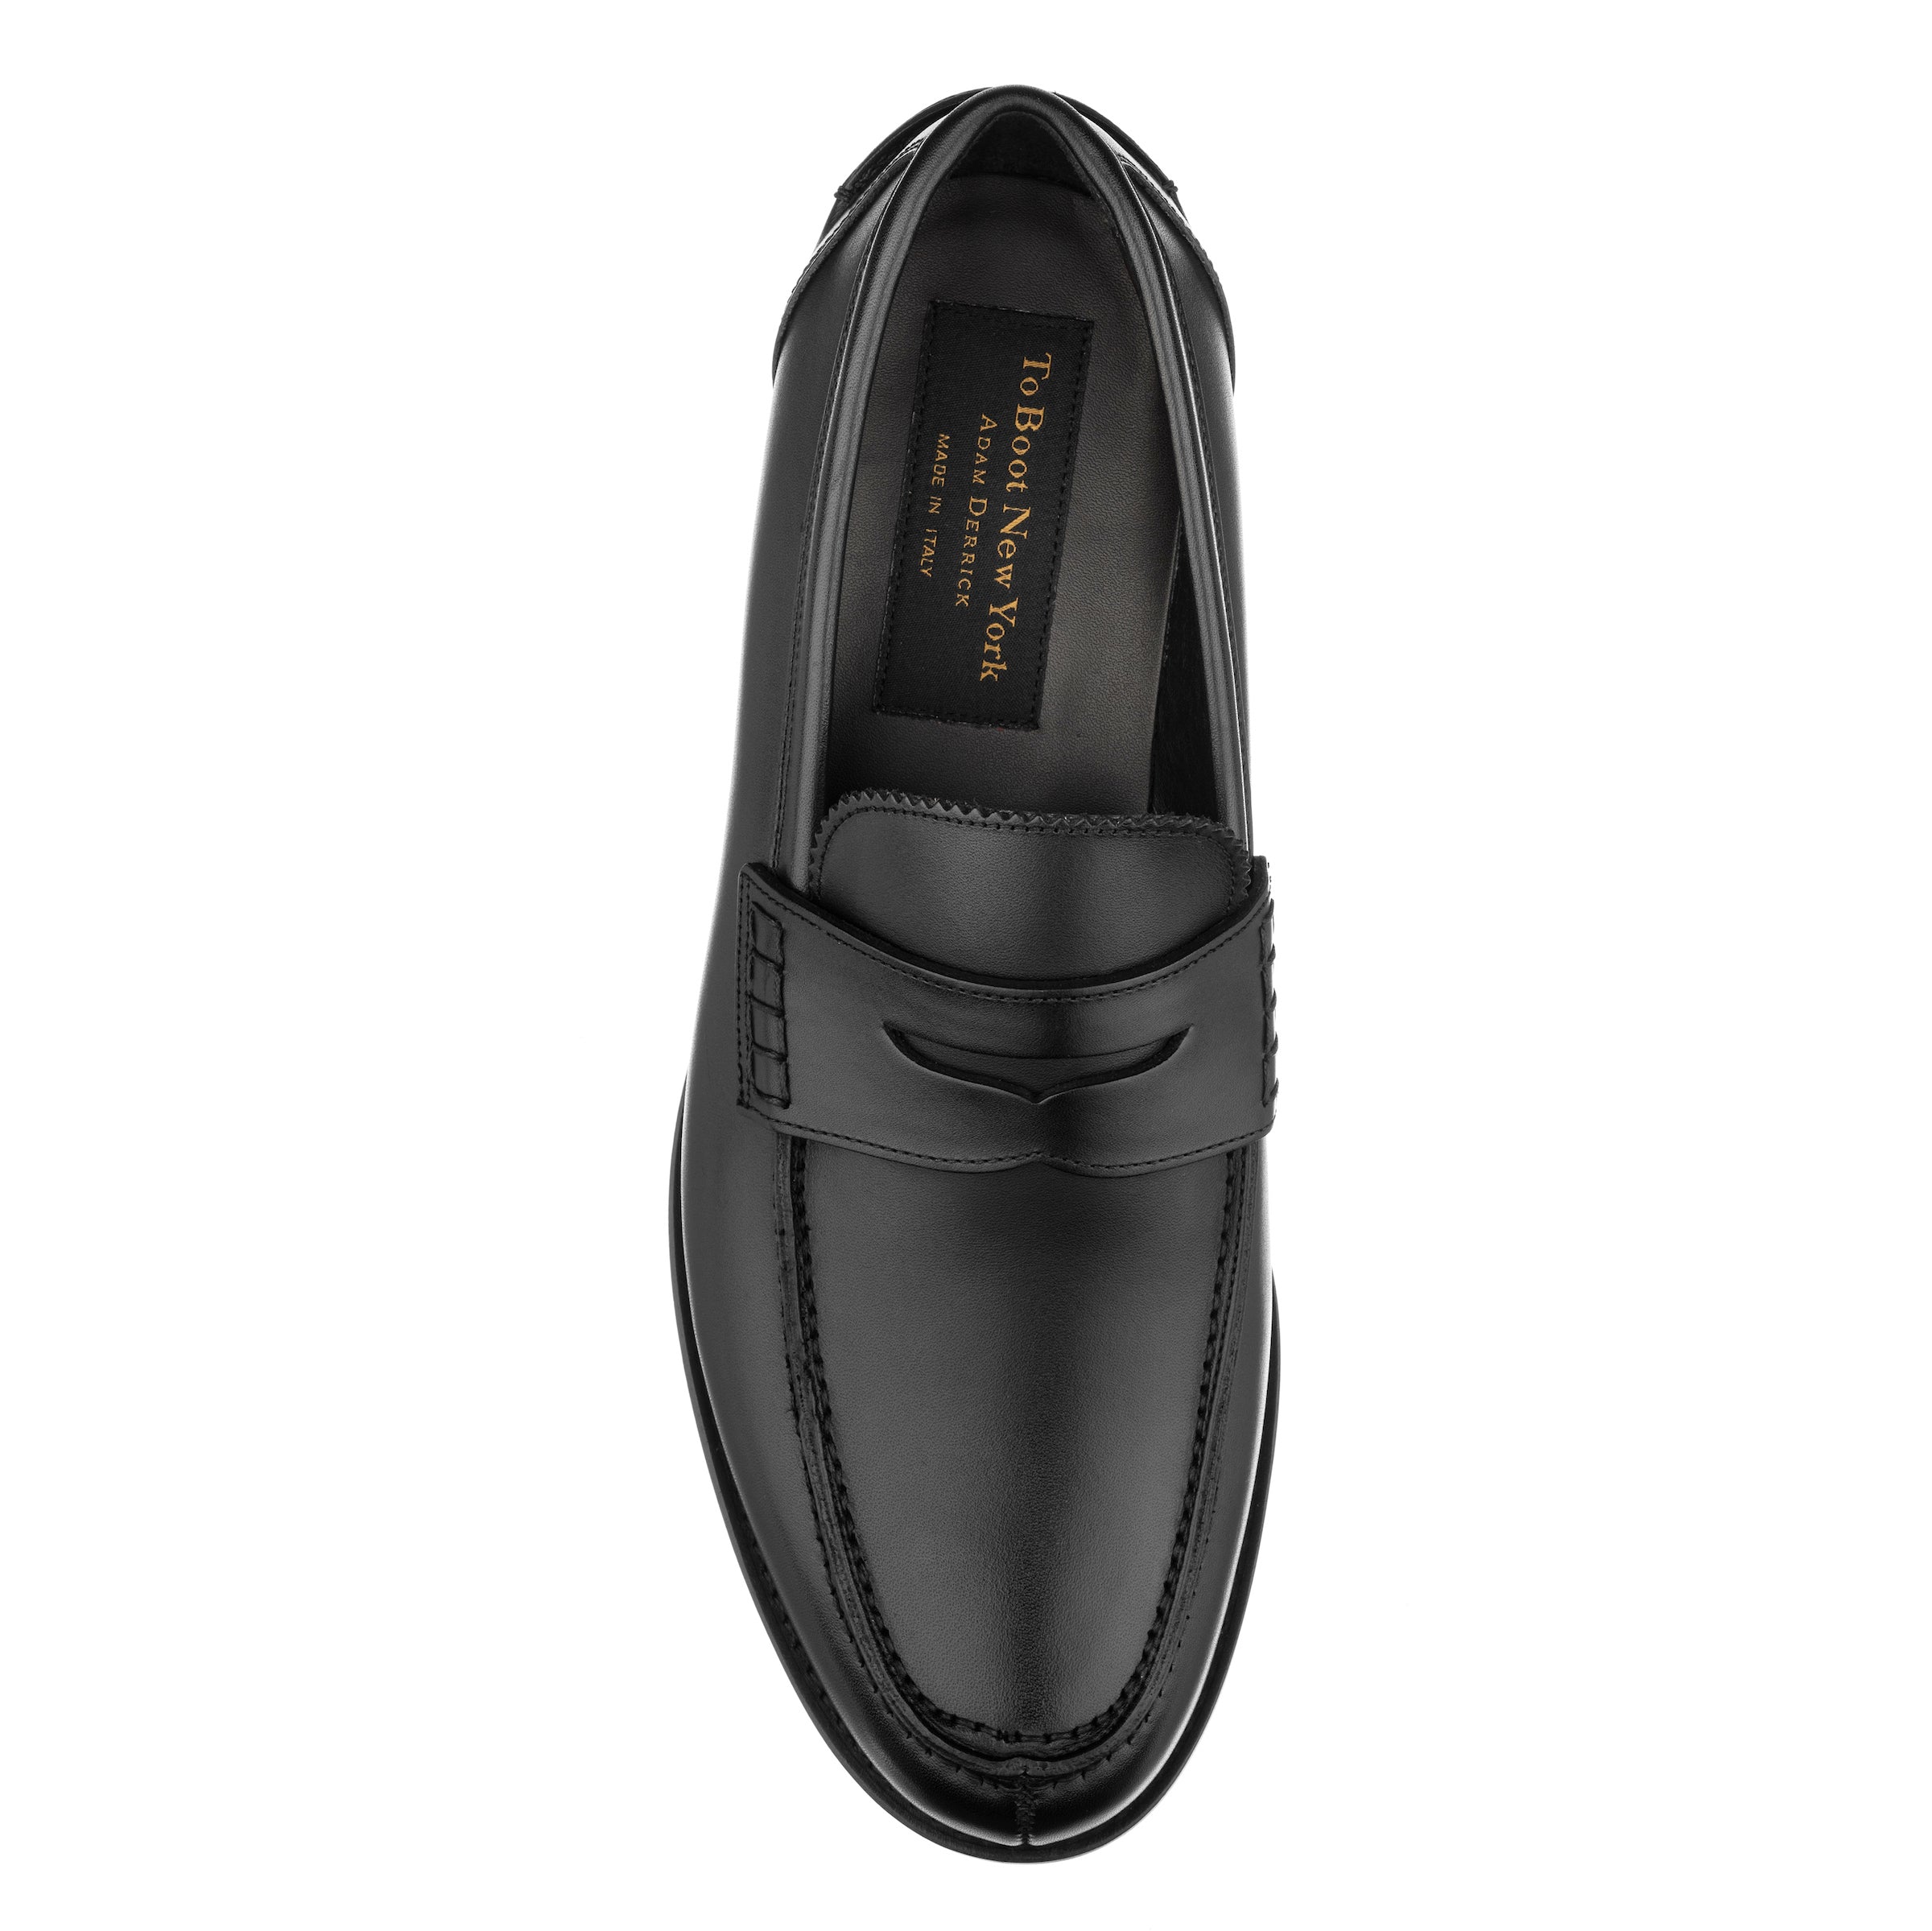 Levanzo Black Calf Penny Loafer